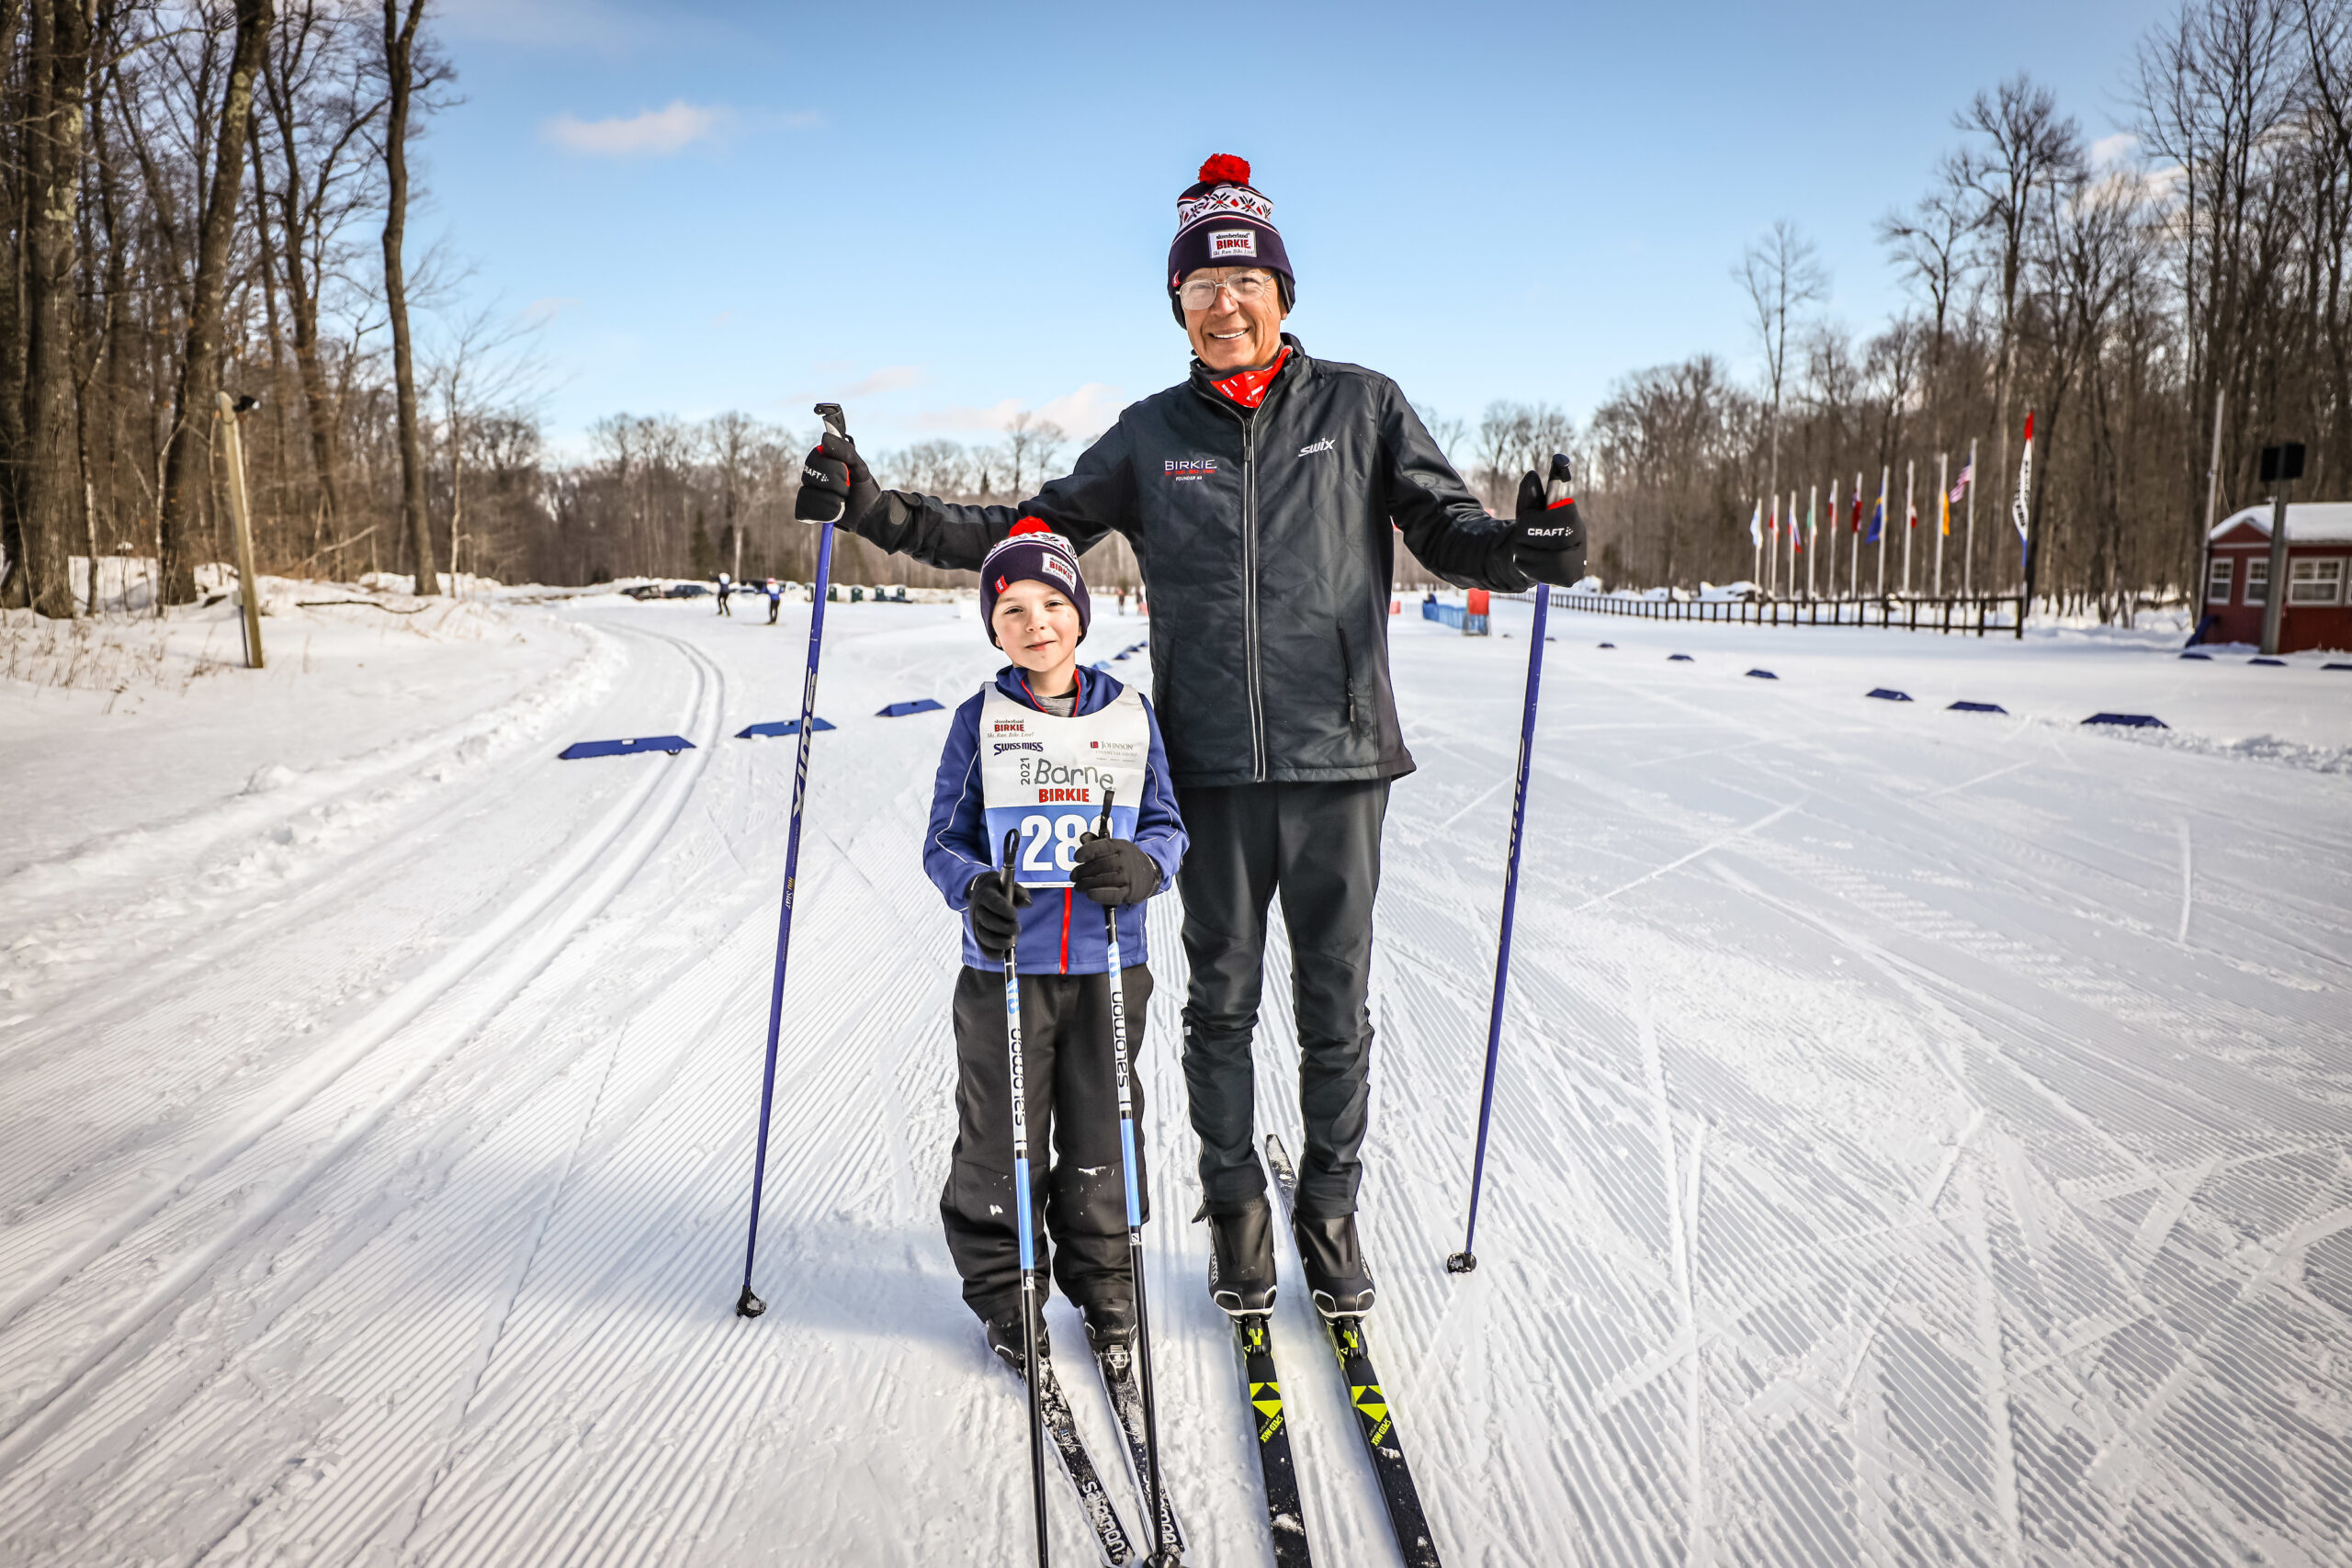 Ernie St. German stands next to his grandson Benjamin as the two are on skis